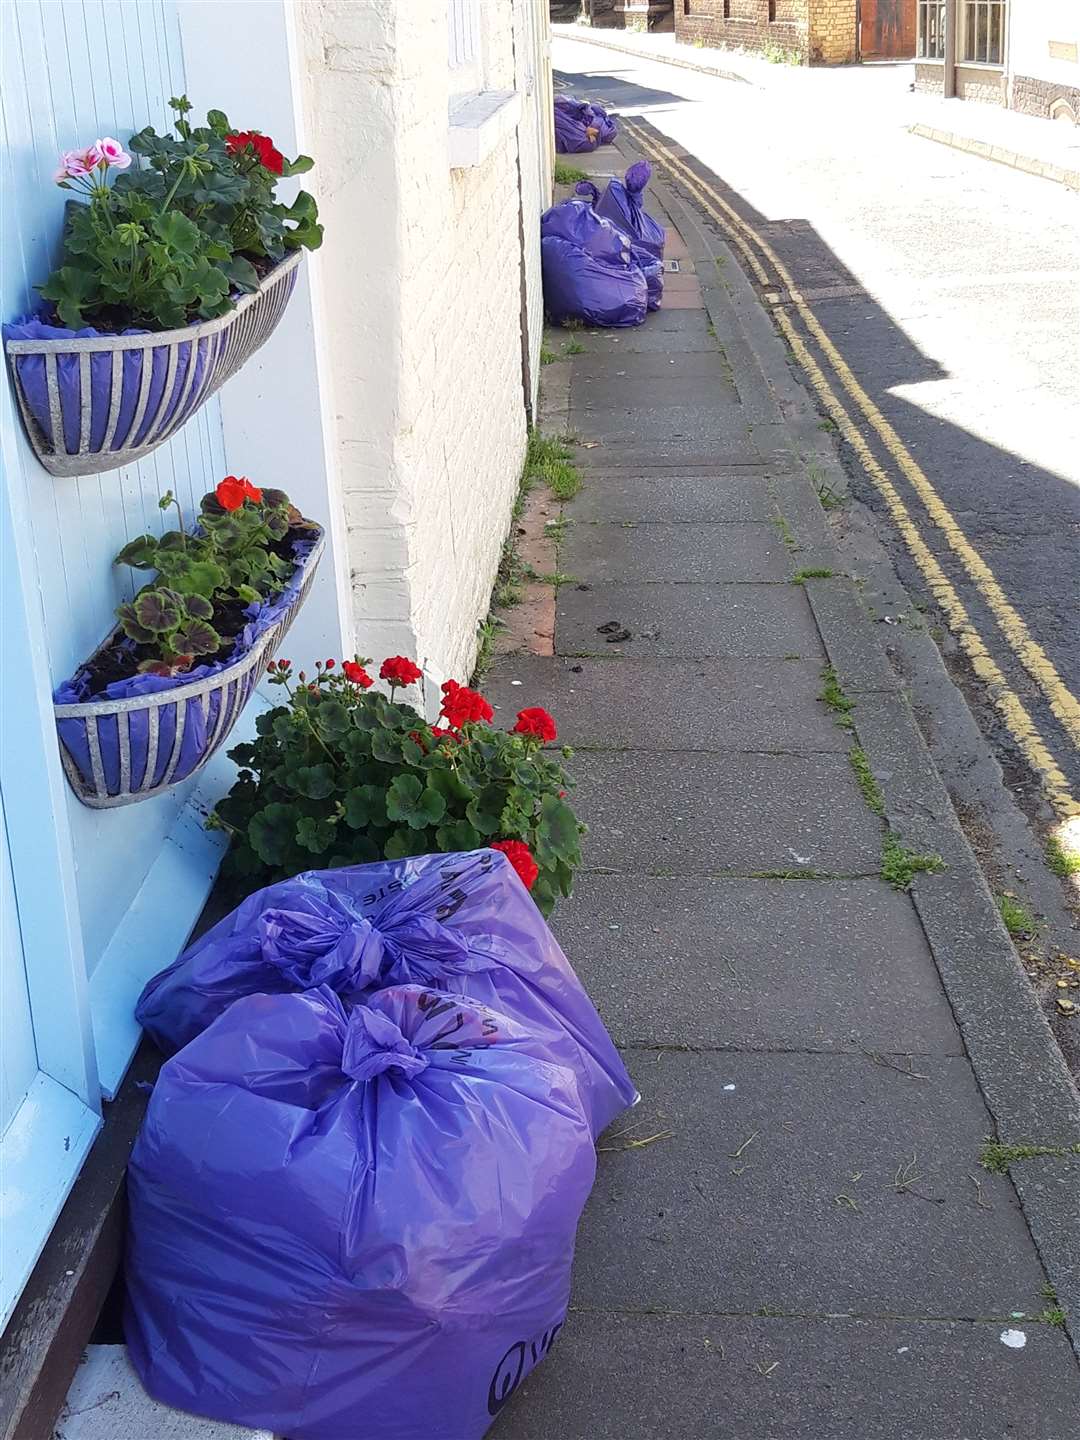 Usually picturesque, the binbags were a blight on Middle Street last weekend. Picture Susan Carlyle